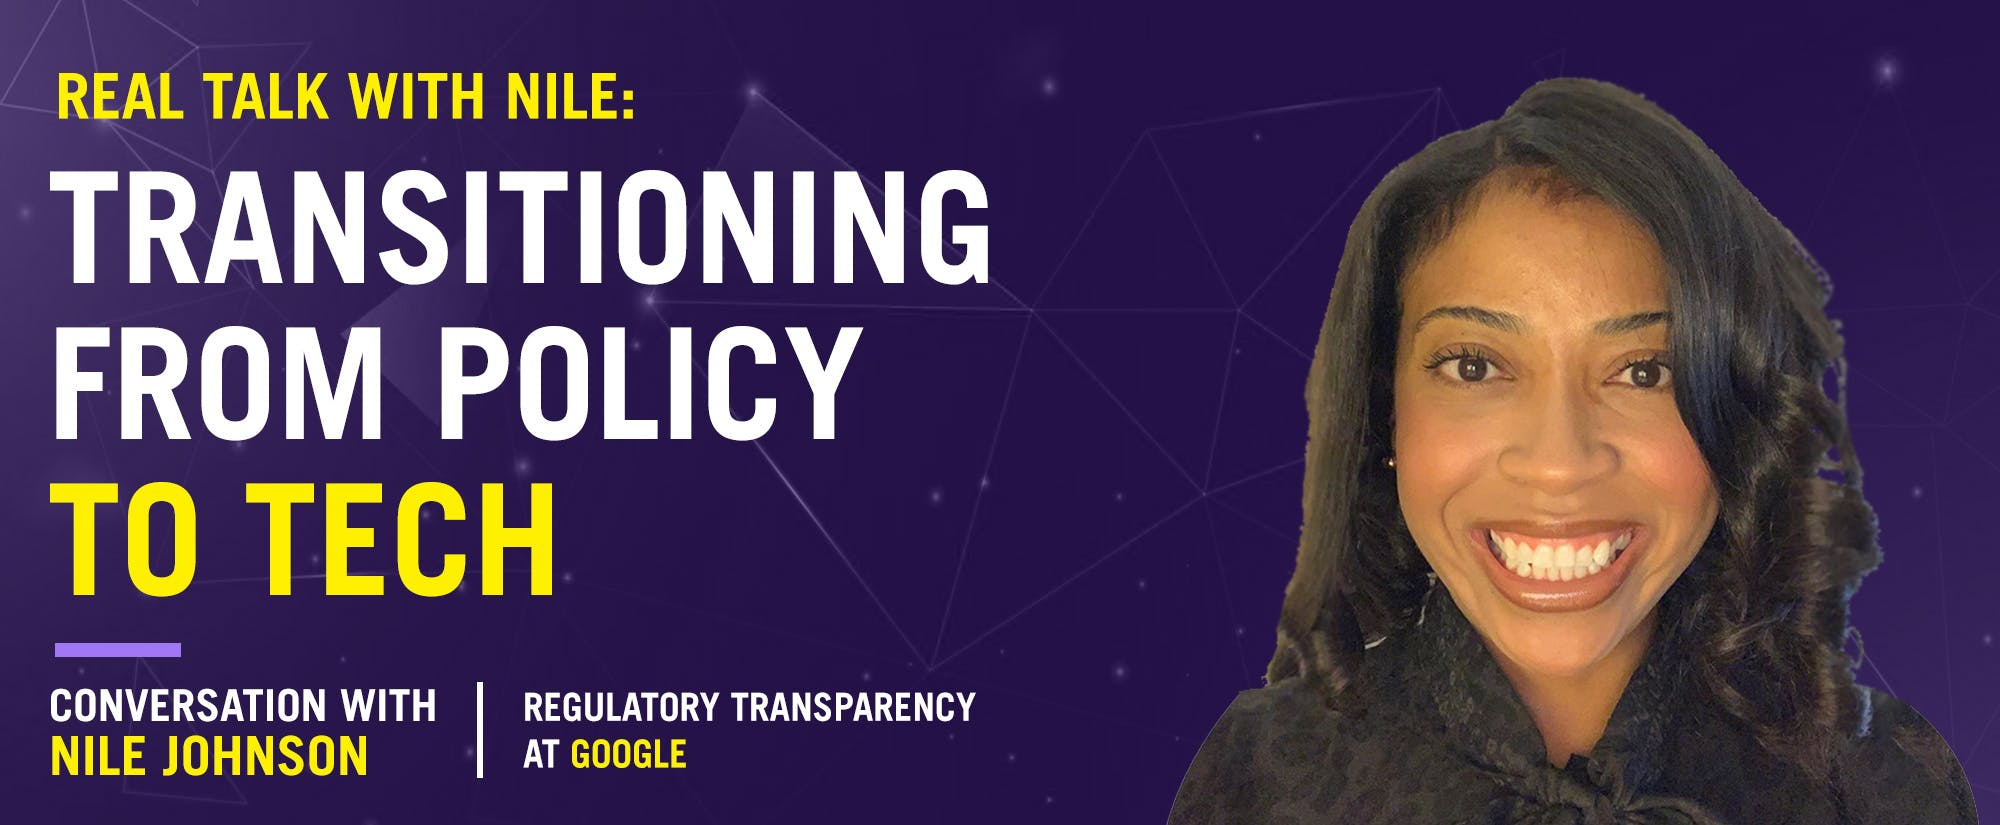 Real Talk with Nile : Transitioning from Policy to Tech